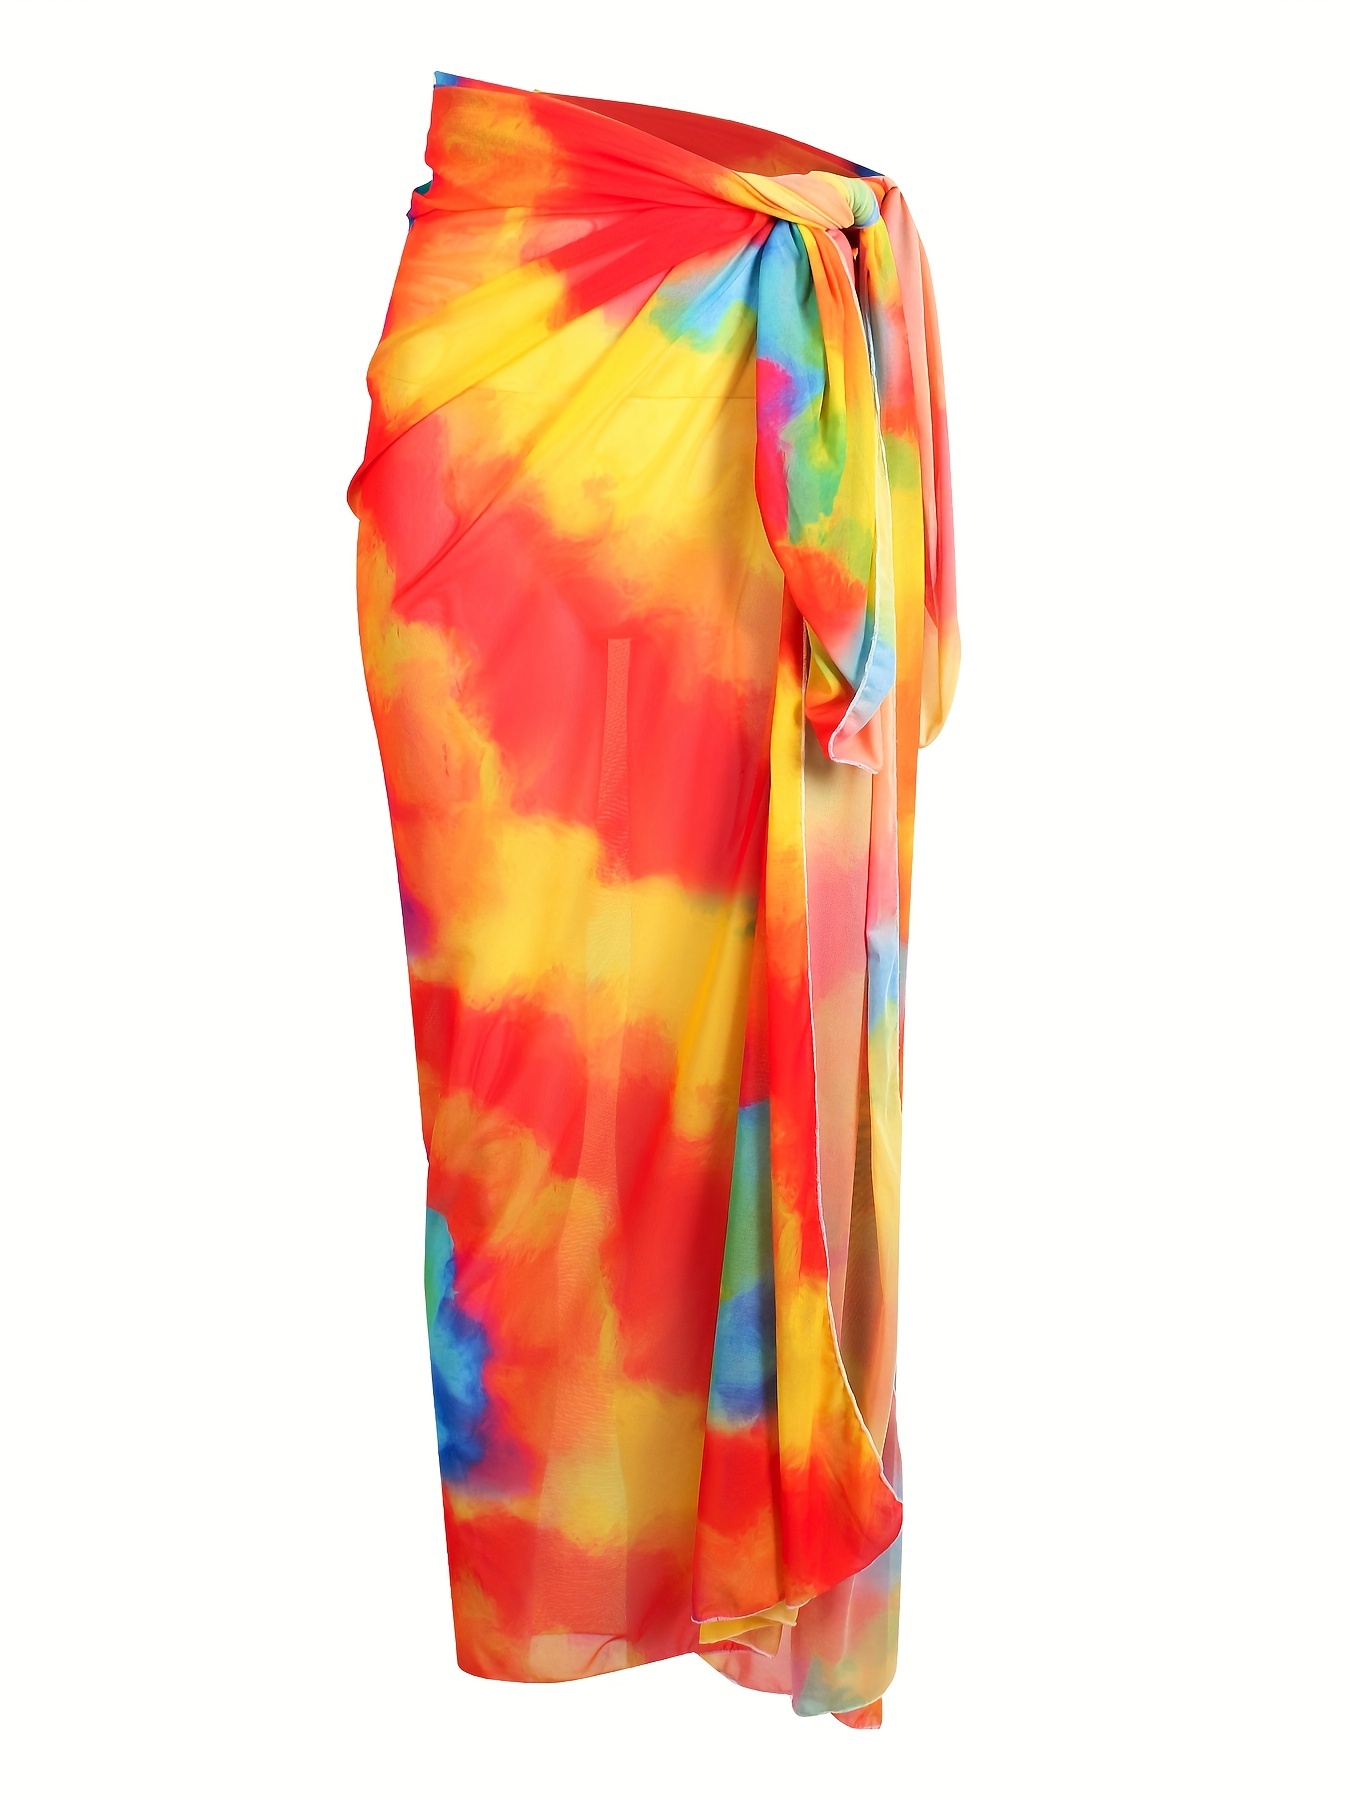 Black Red Ombre Swimsuit Cover Up Women, Tie Dye Gradient Wrap